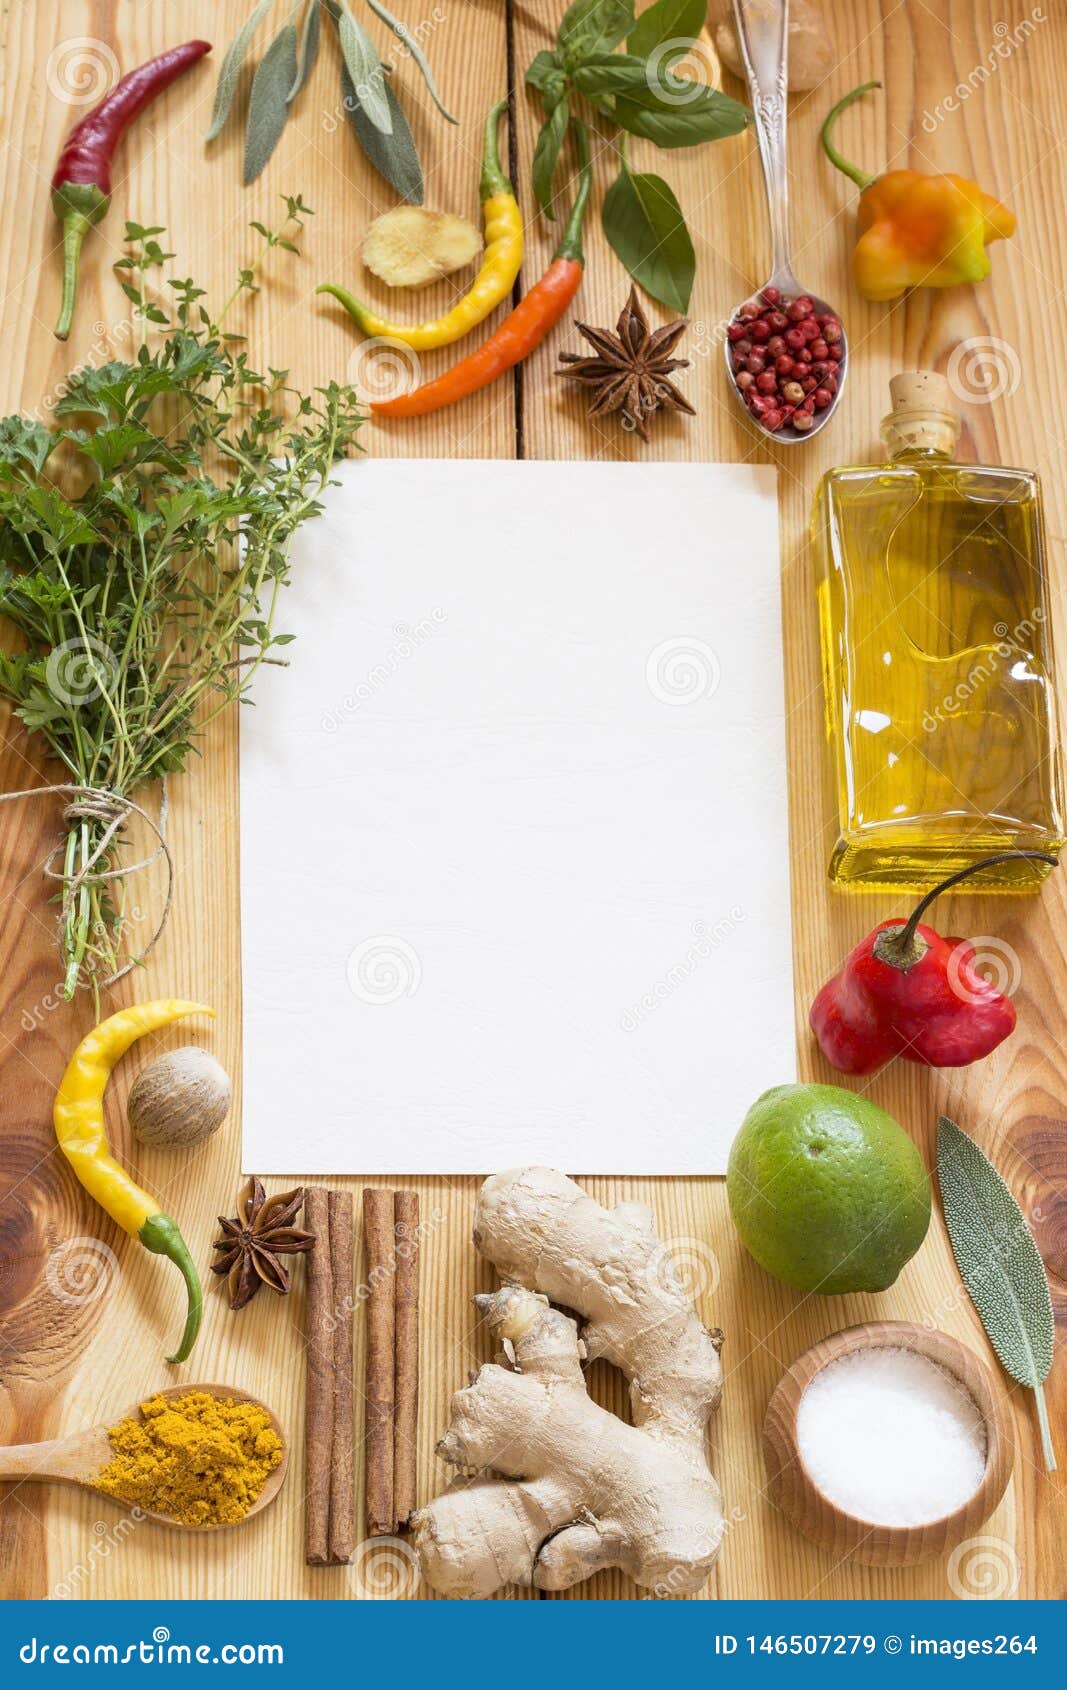 Various Herbs and Spices Background Stock Image - Image of arabian ...